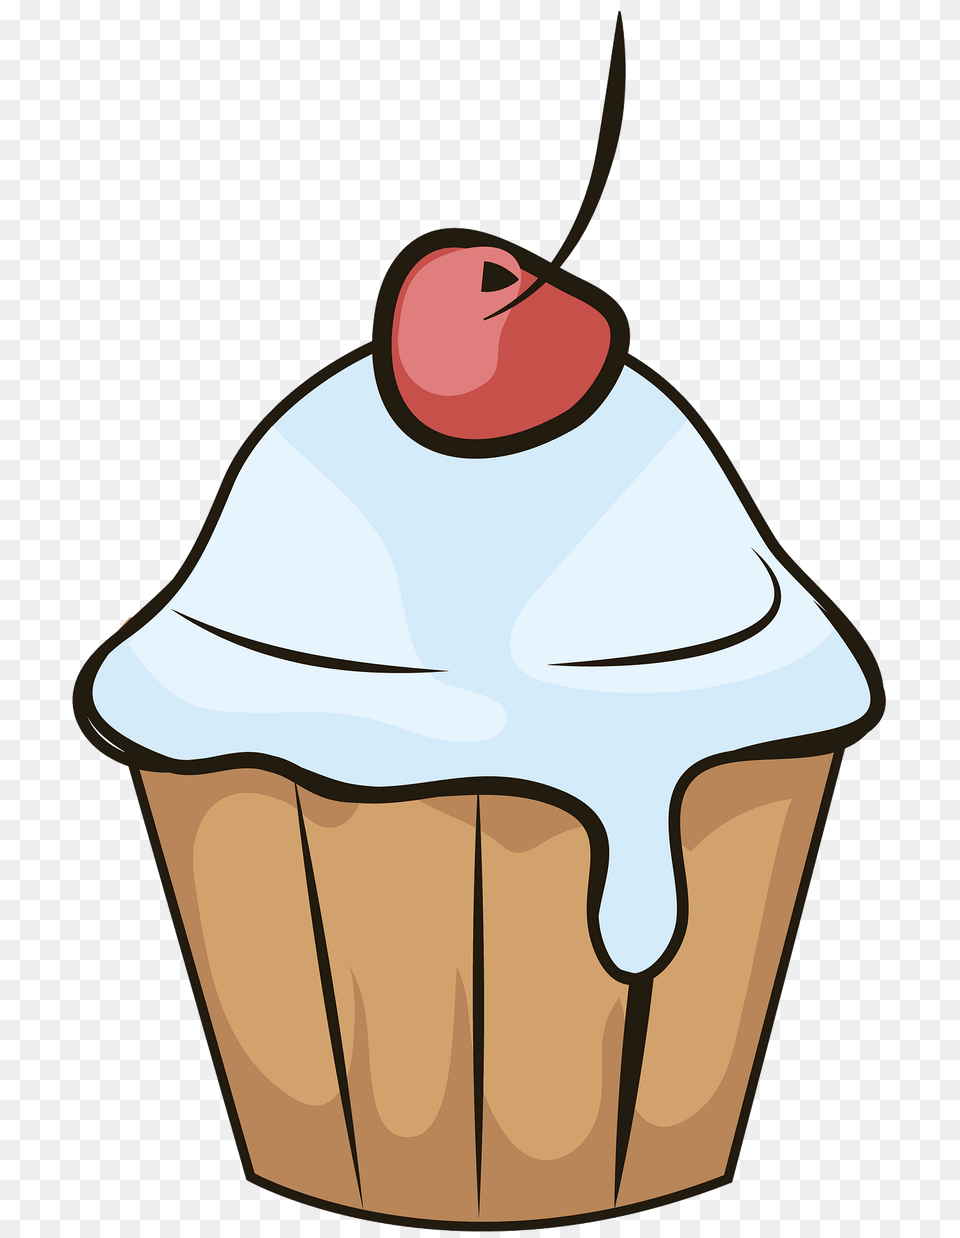 Cupcake With A Cherry Clipart, Cake, Cream, Dessert, Food Png